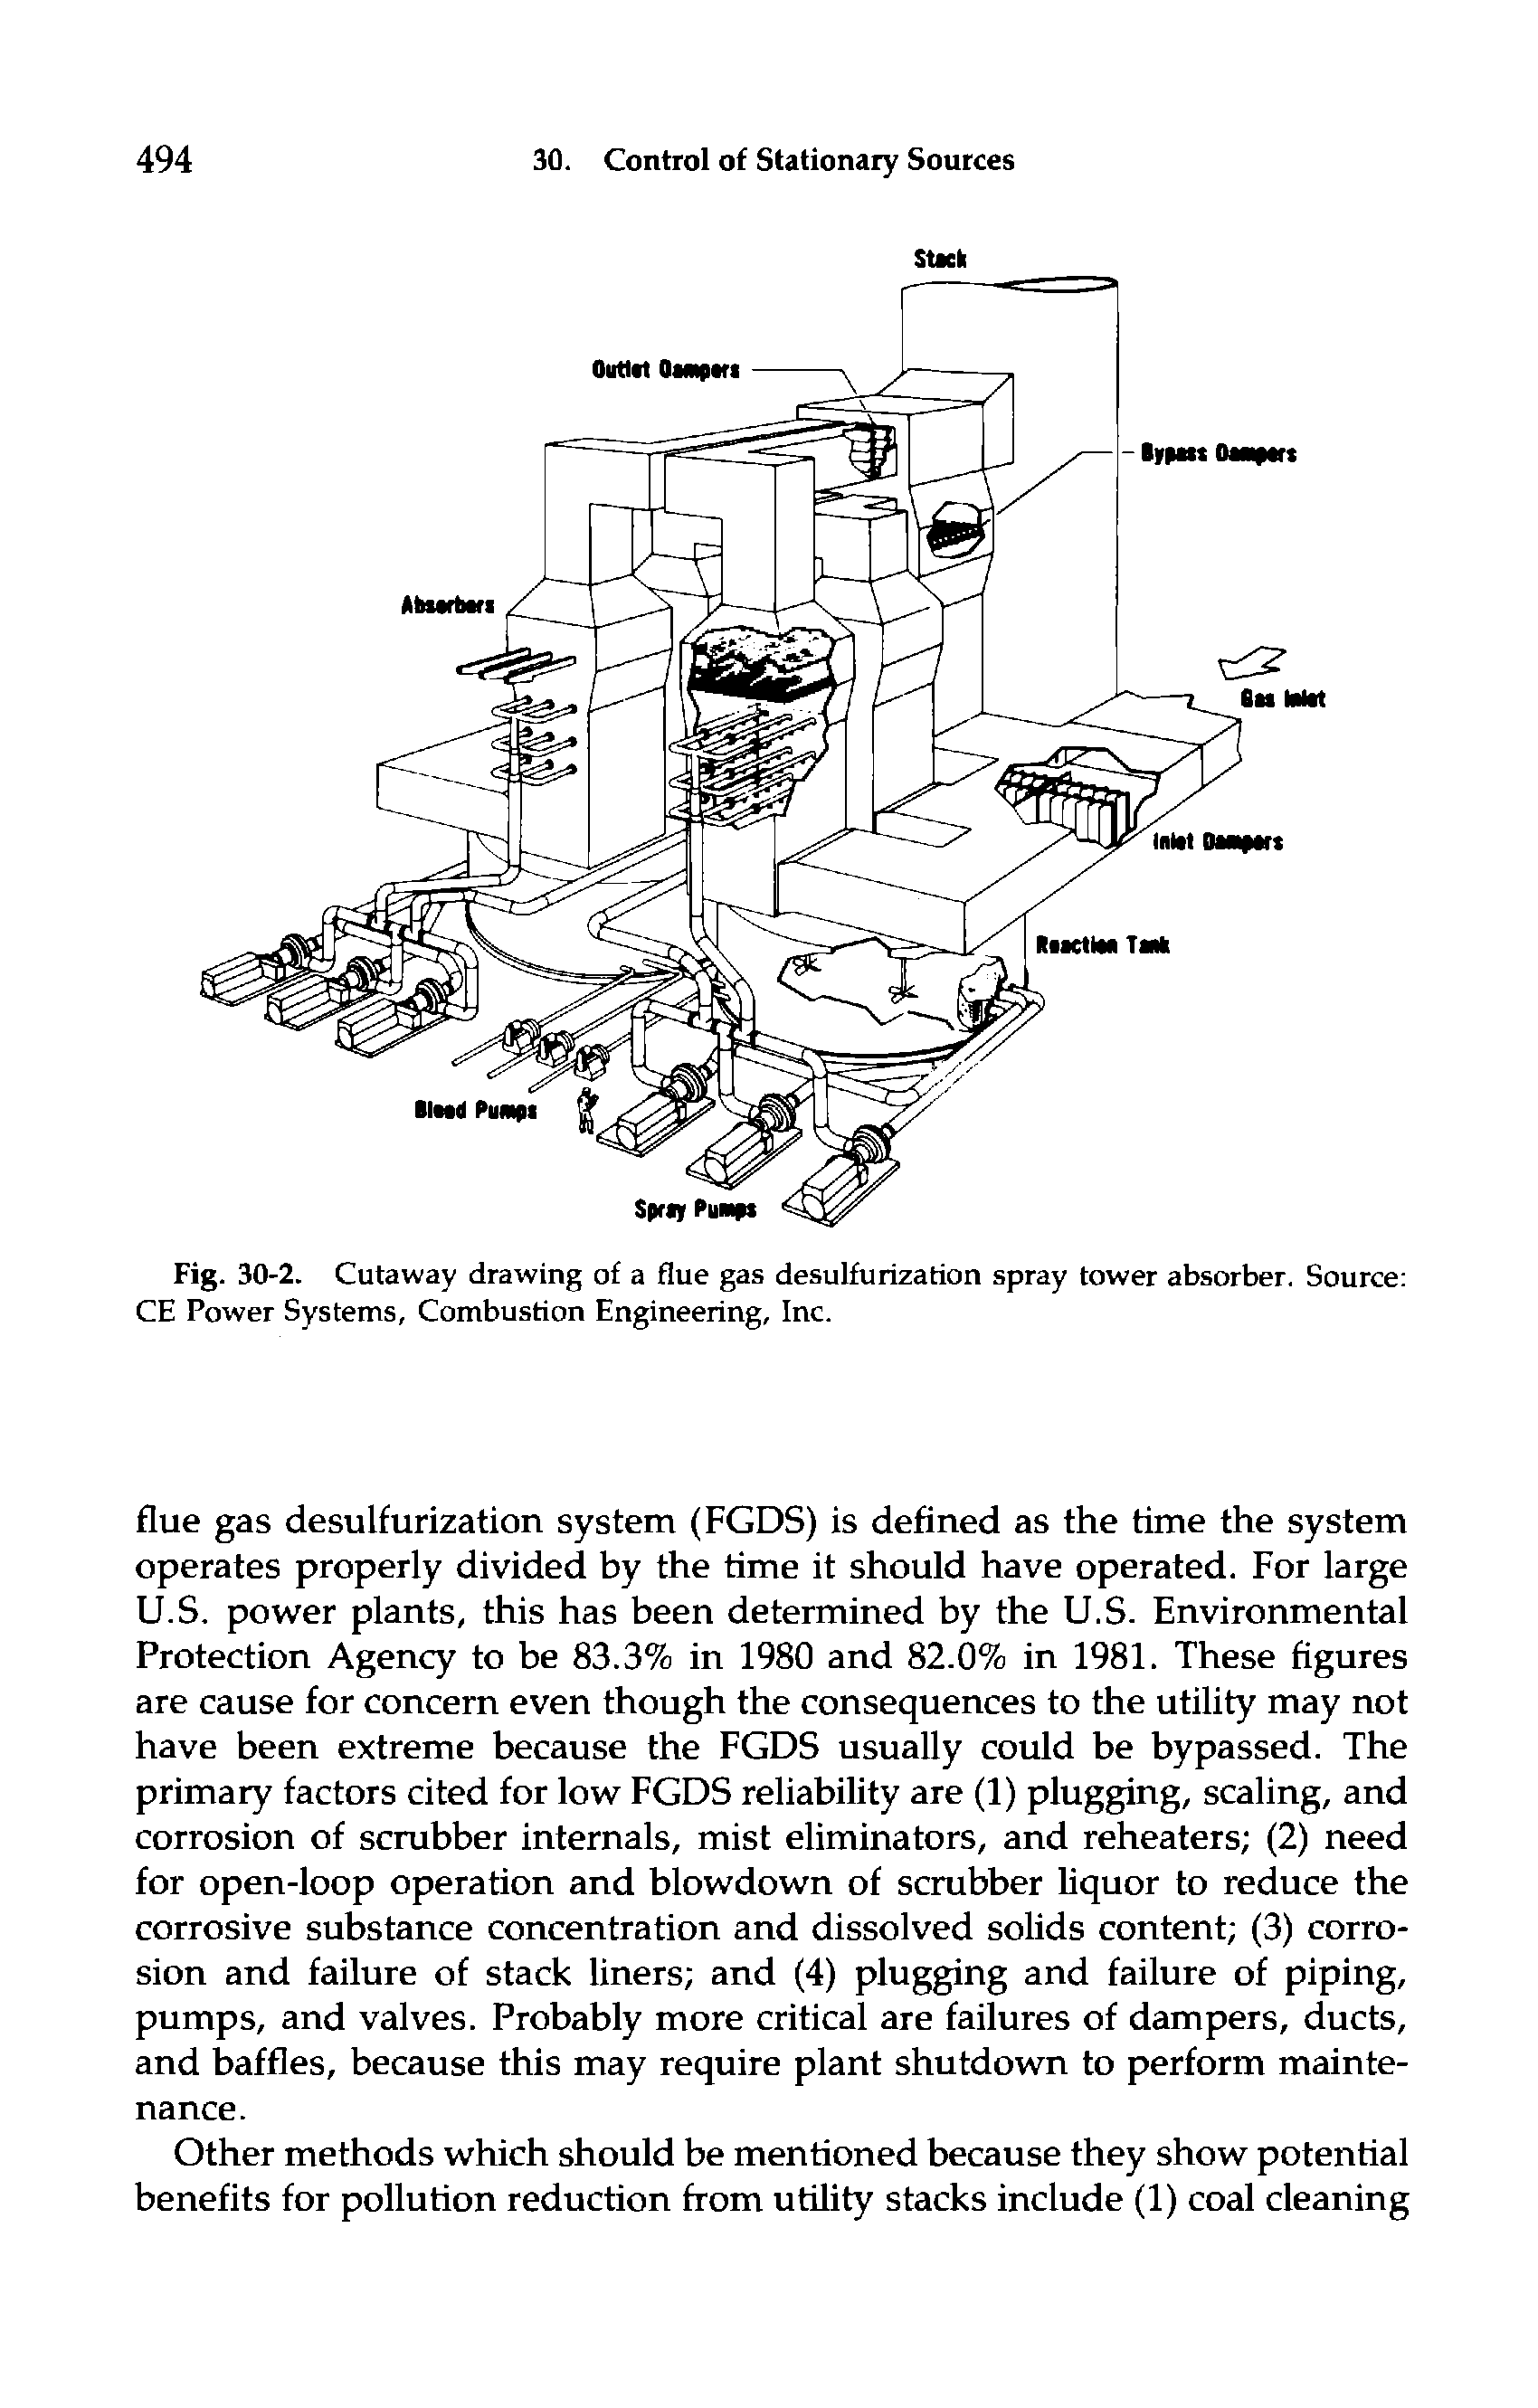 Fig. 30-2. Cutaway drawing of a flue gas desulfurization spray tower absorber. Source CE Power Systems, Combustion Engineering, Inc.